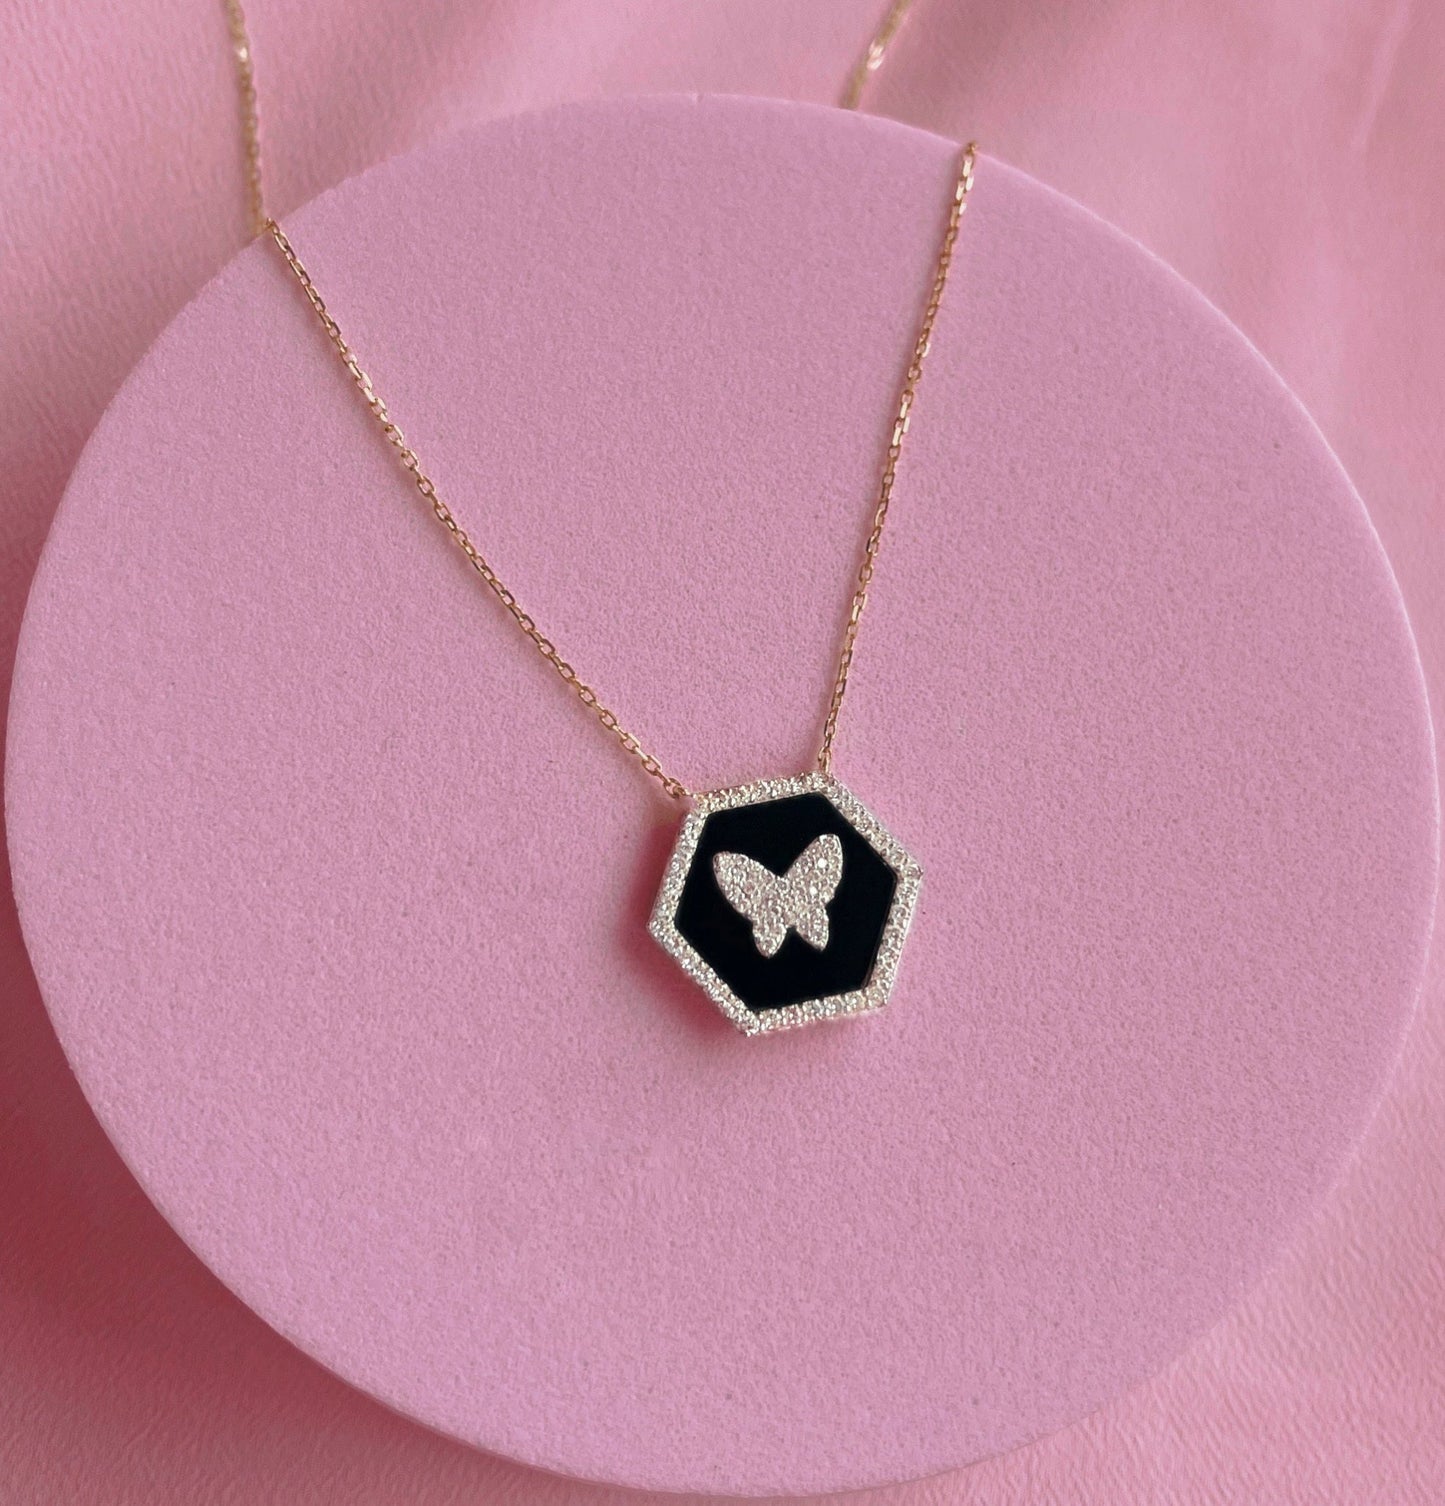 Hexa Frame Necklace in Diamond and Black Onyx - 18k Gold - Lynor